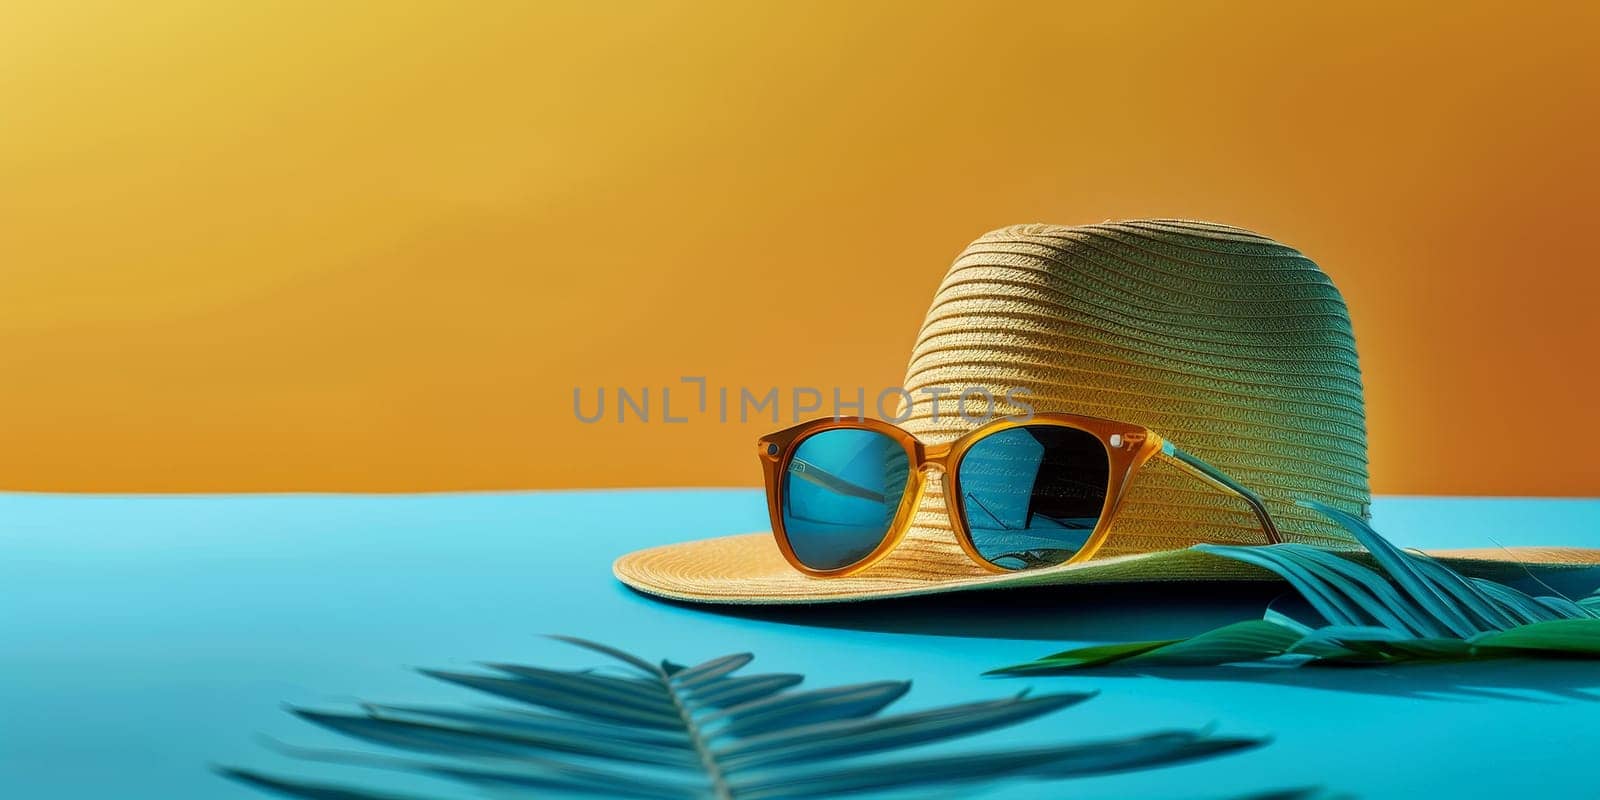 A straw hat and sunglasses are on a table. The image has a bright and sunny mood